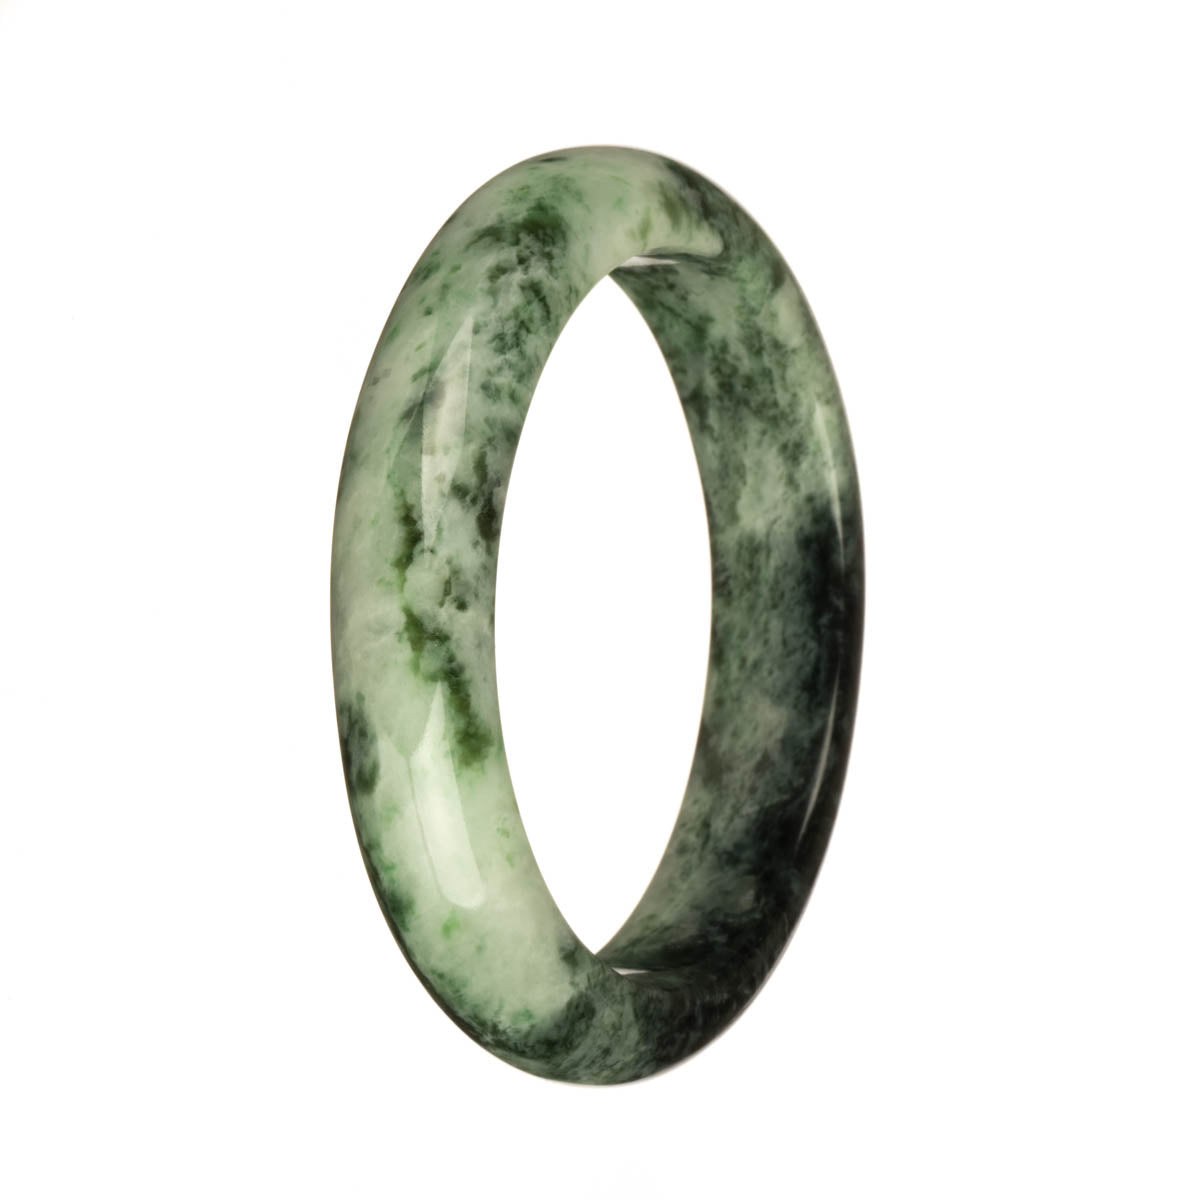 56.8mm Grey with Dark Green, Green and Apple Green Patterns Jade Bangle Bracelet